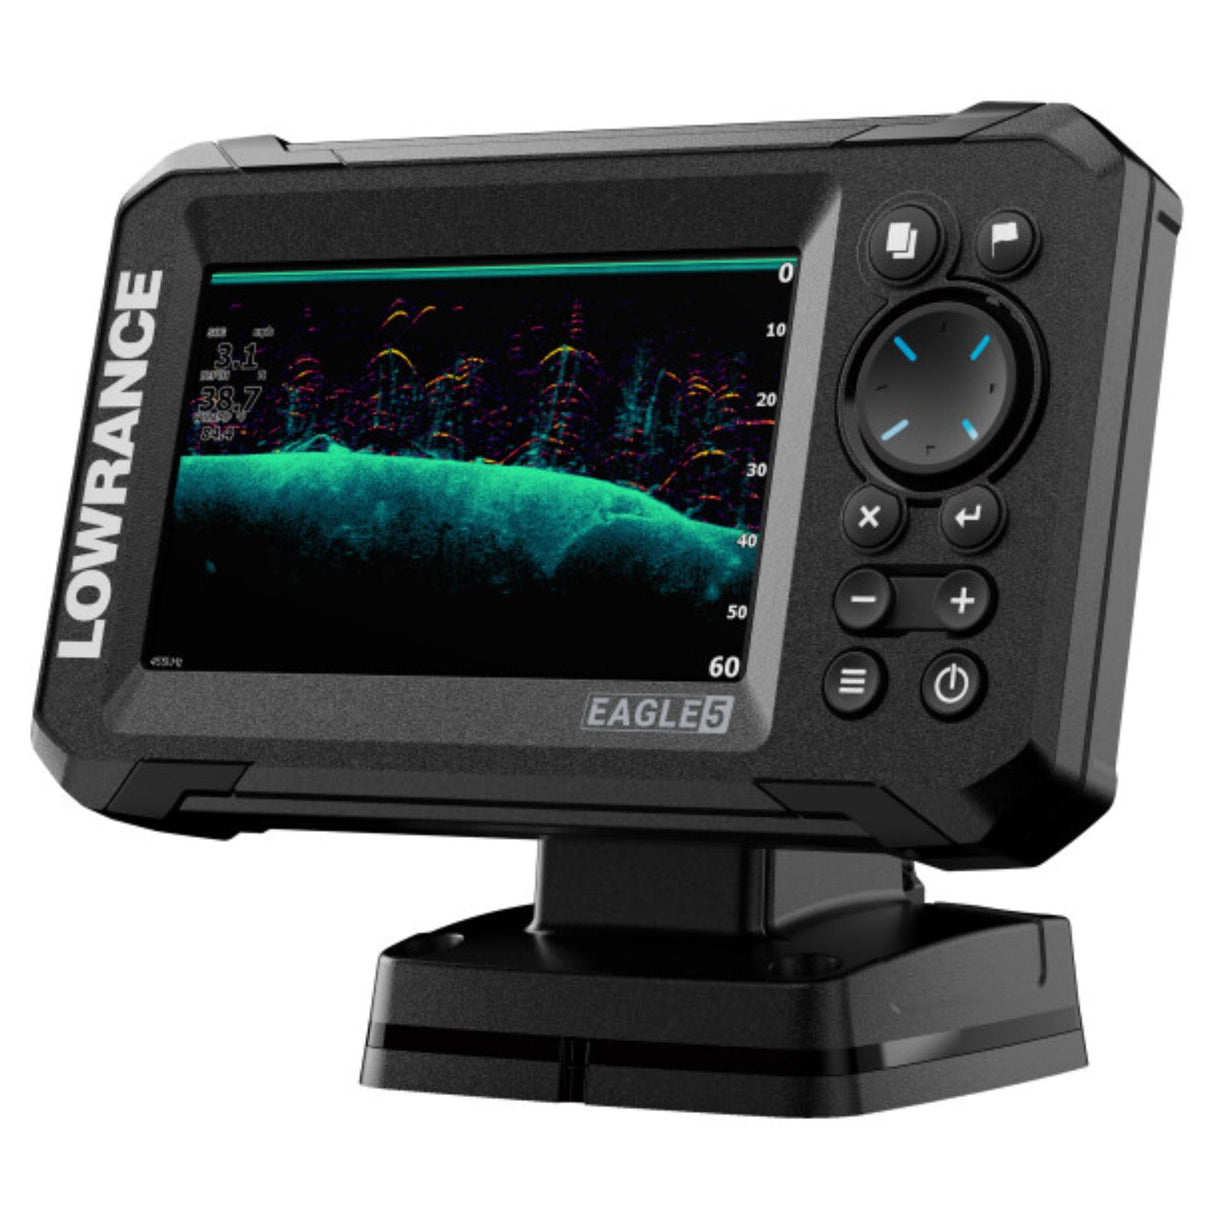 Lowrance Eagle 5 Fishfinder/ Chartplotter with 50/200 HDI Transducer, Pre-loaded Worldwide Basemap